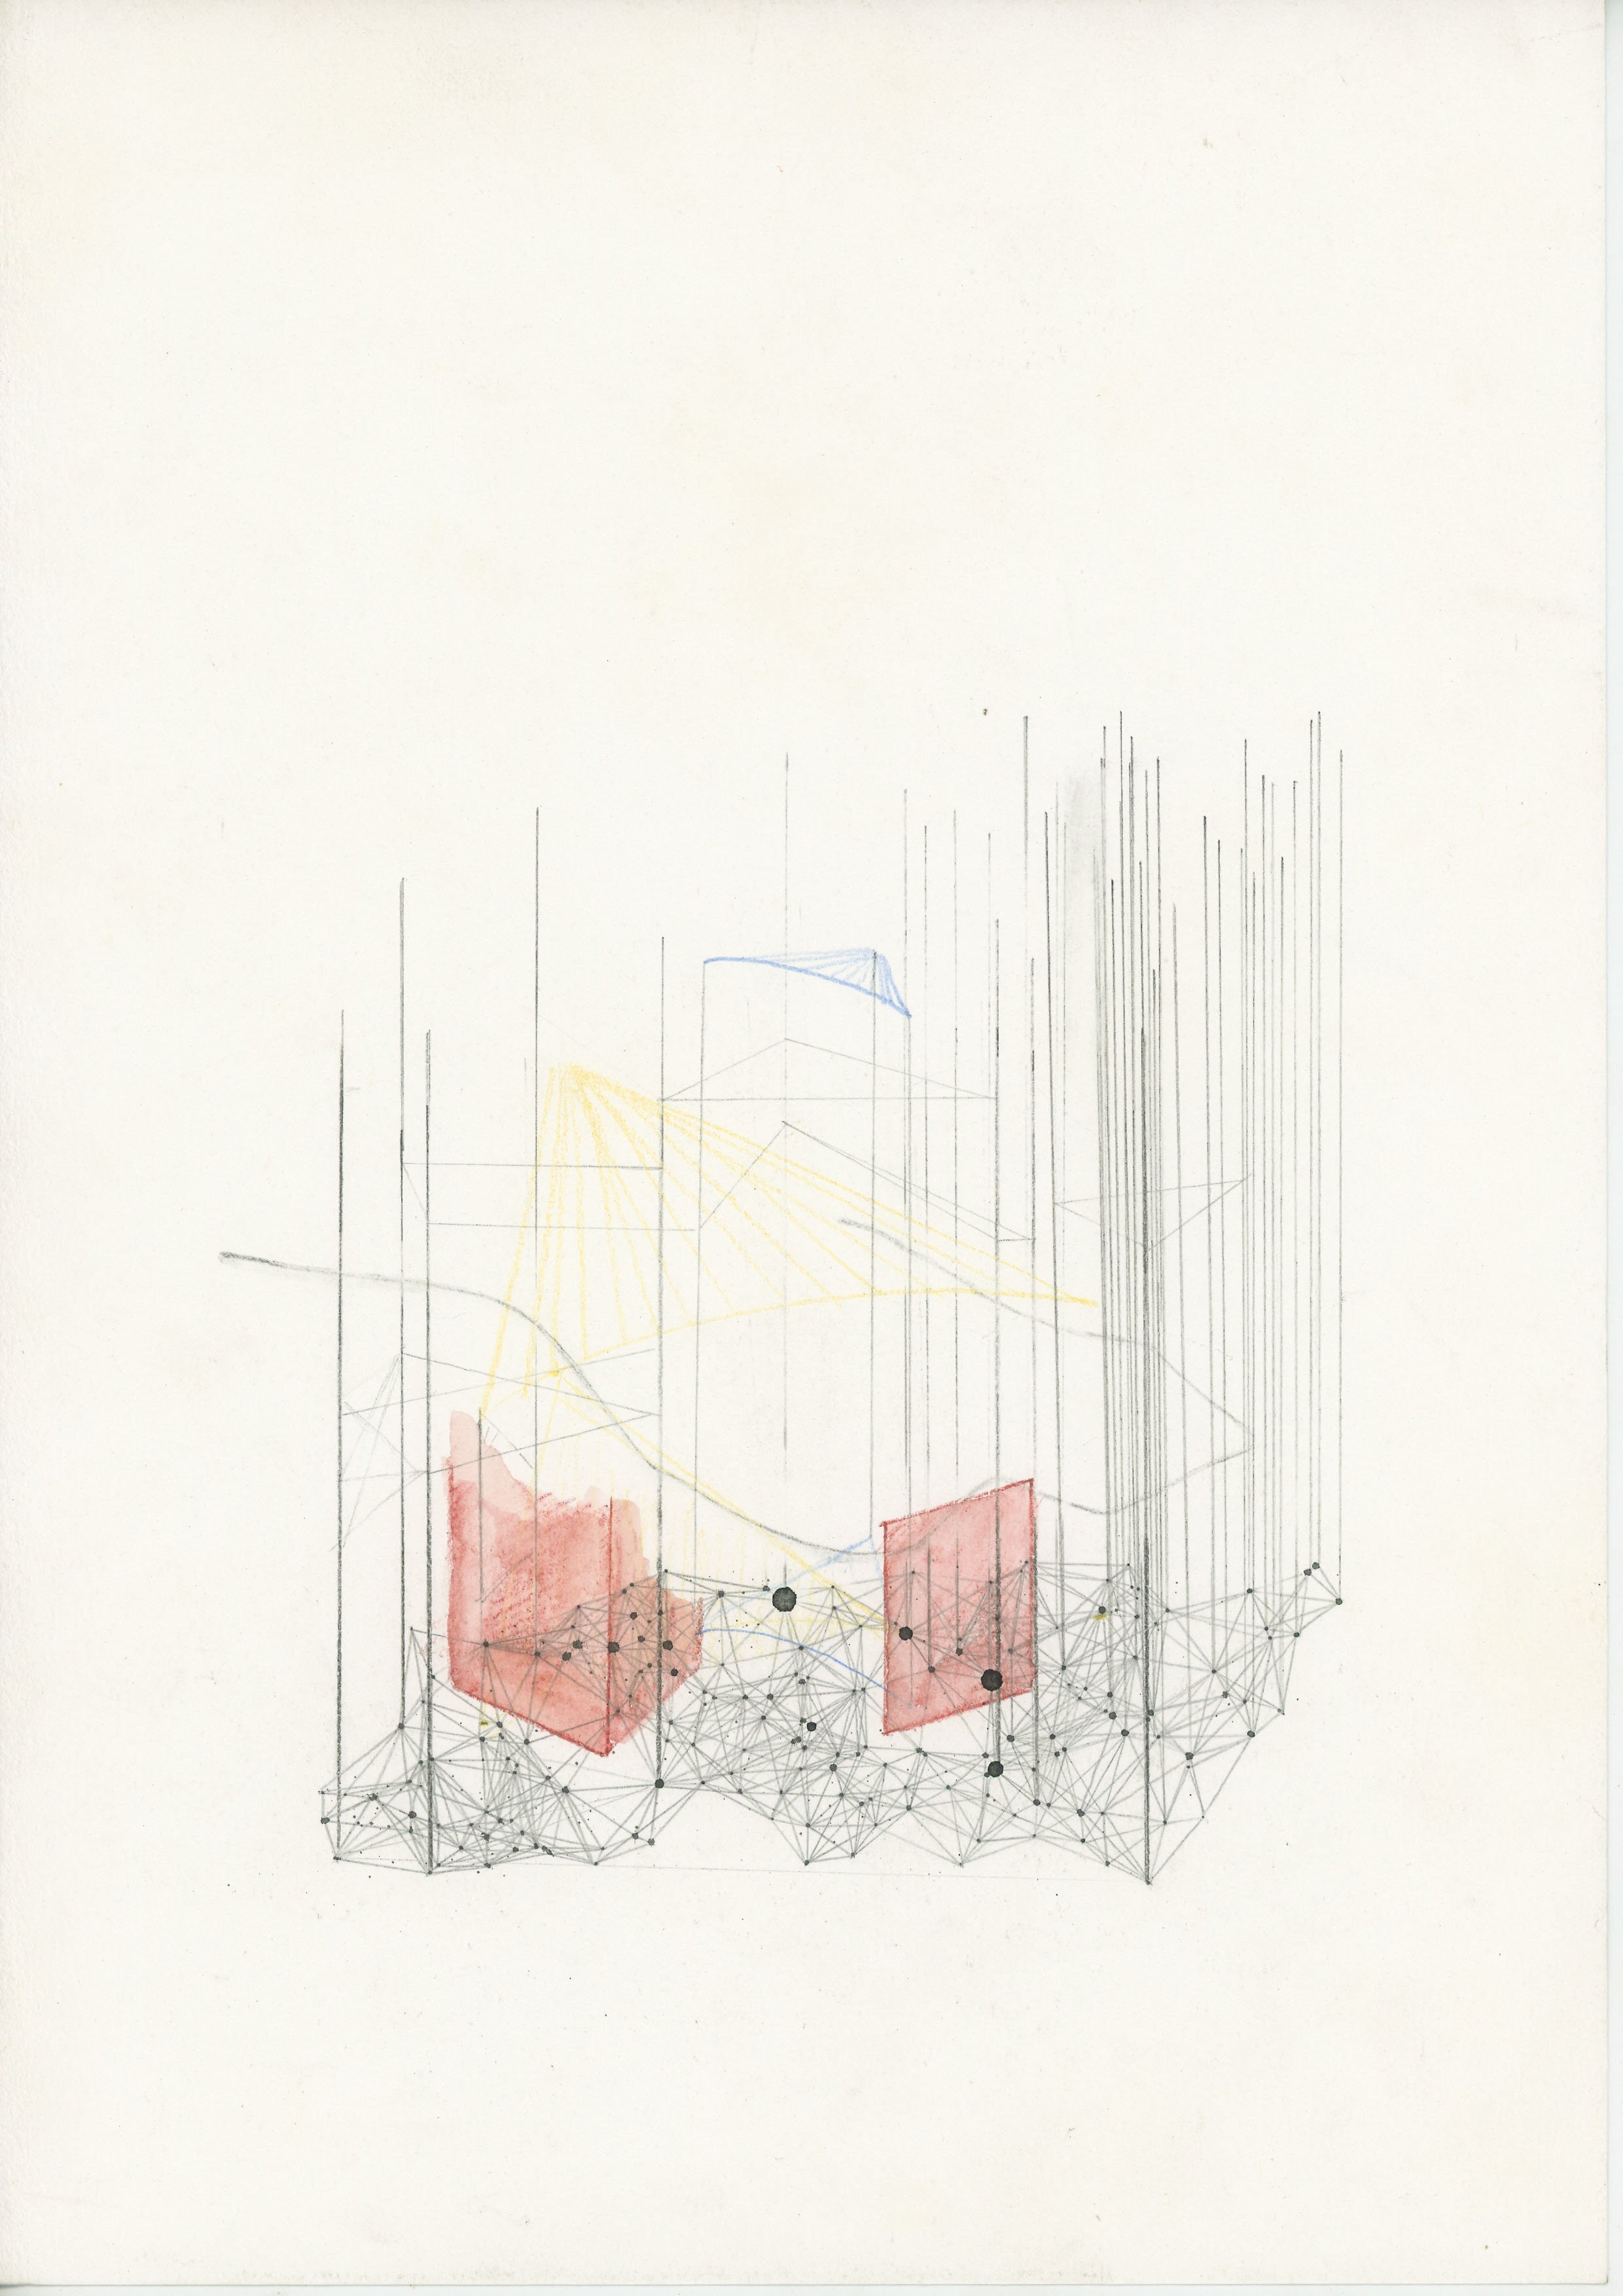    connection, disconnection and motion 1-8.   2015. Ink, watercolor and pencil on paper.&nbsp;59 x 84 cm 